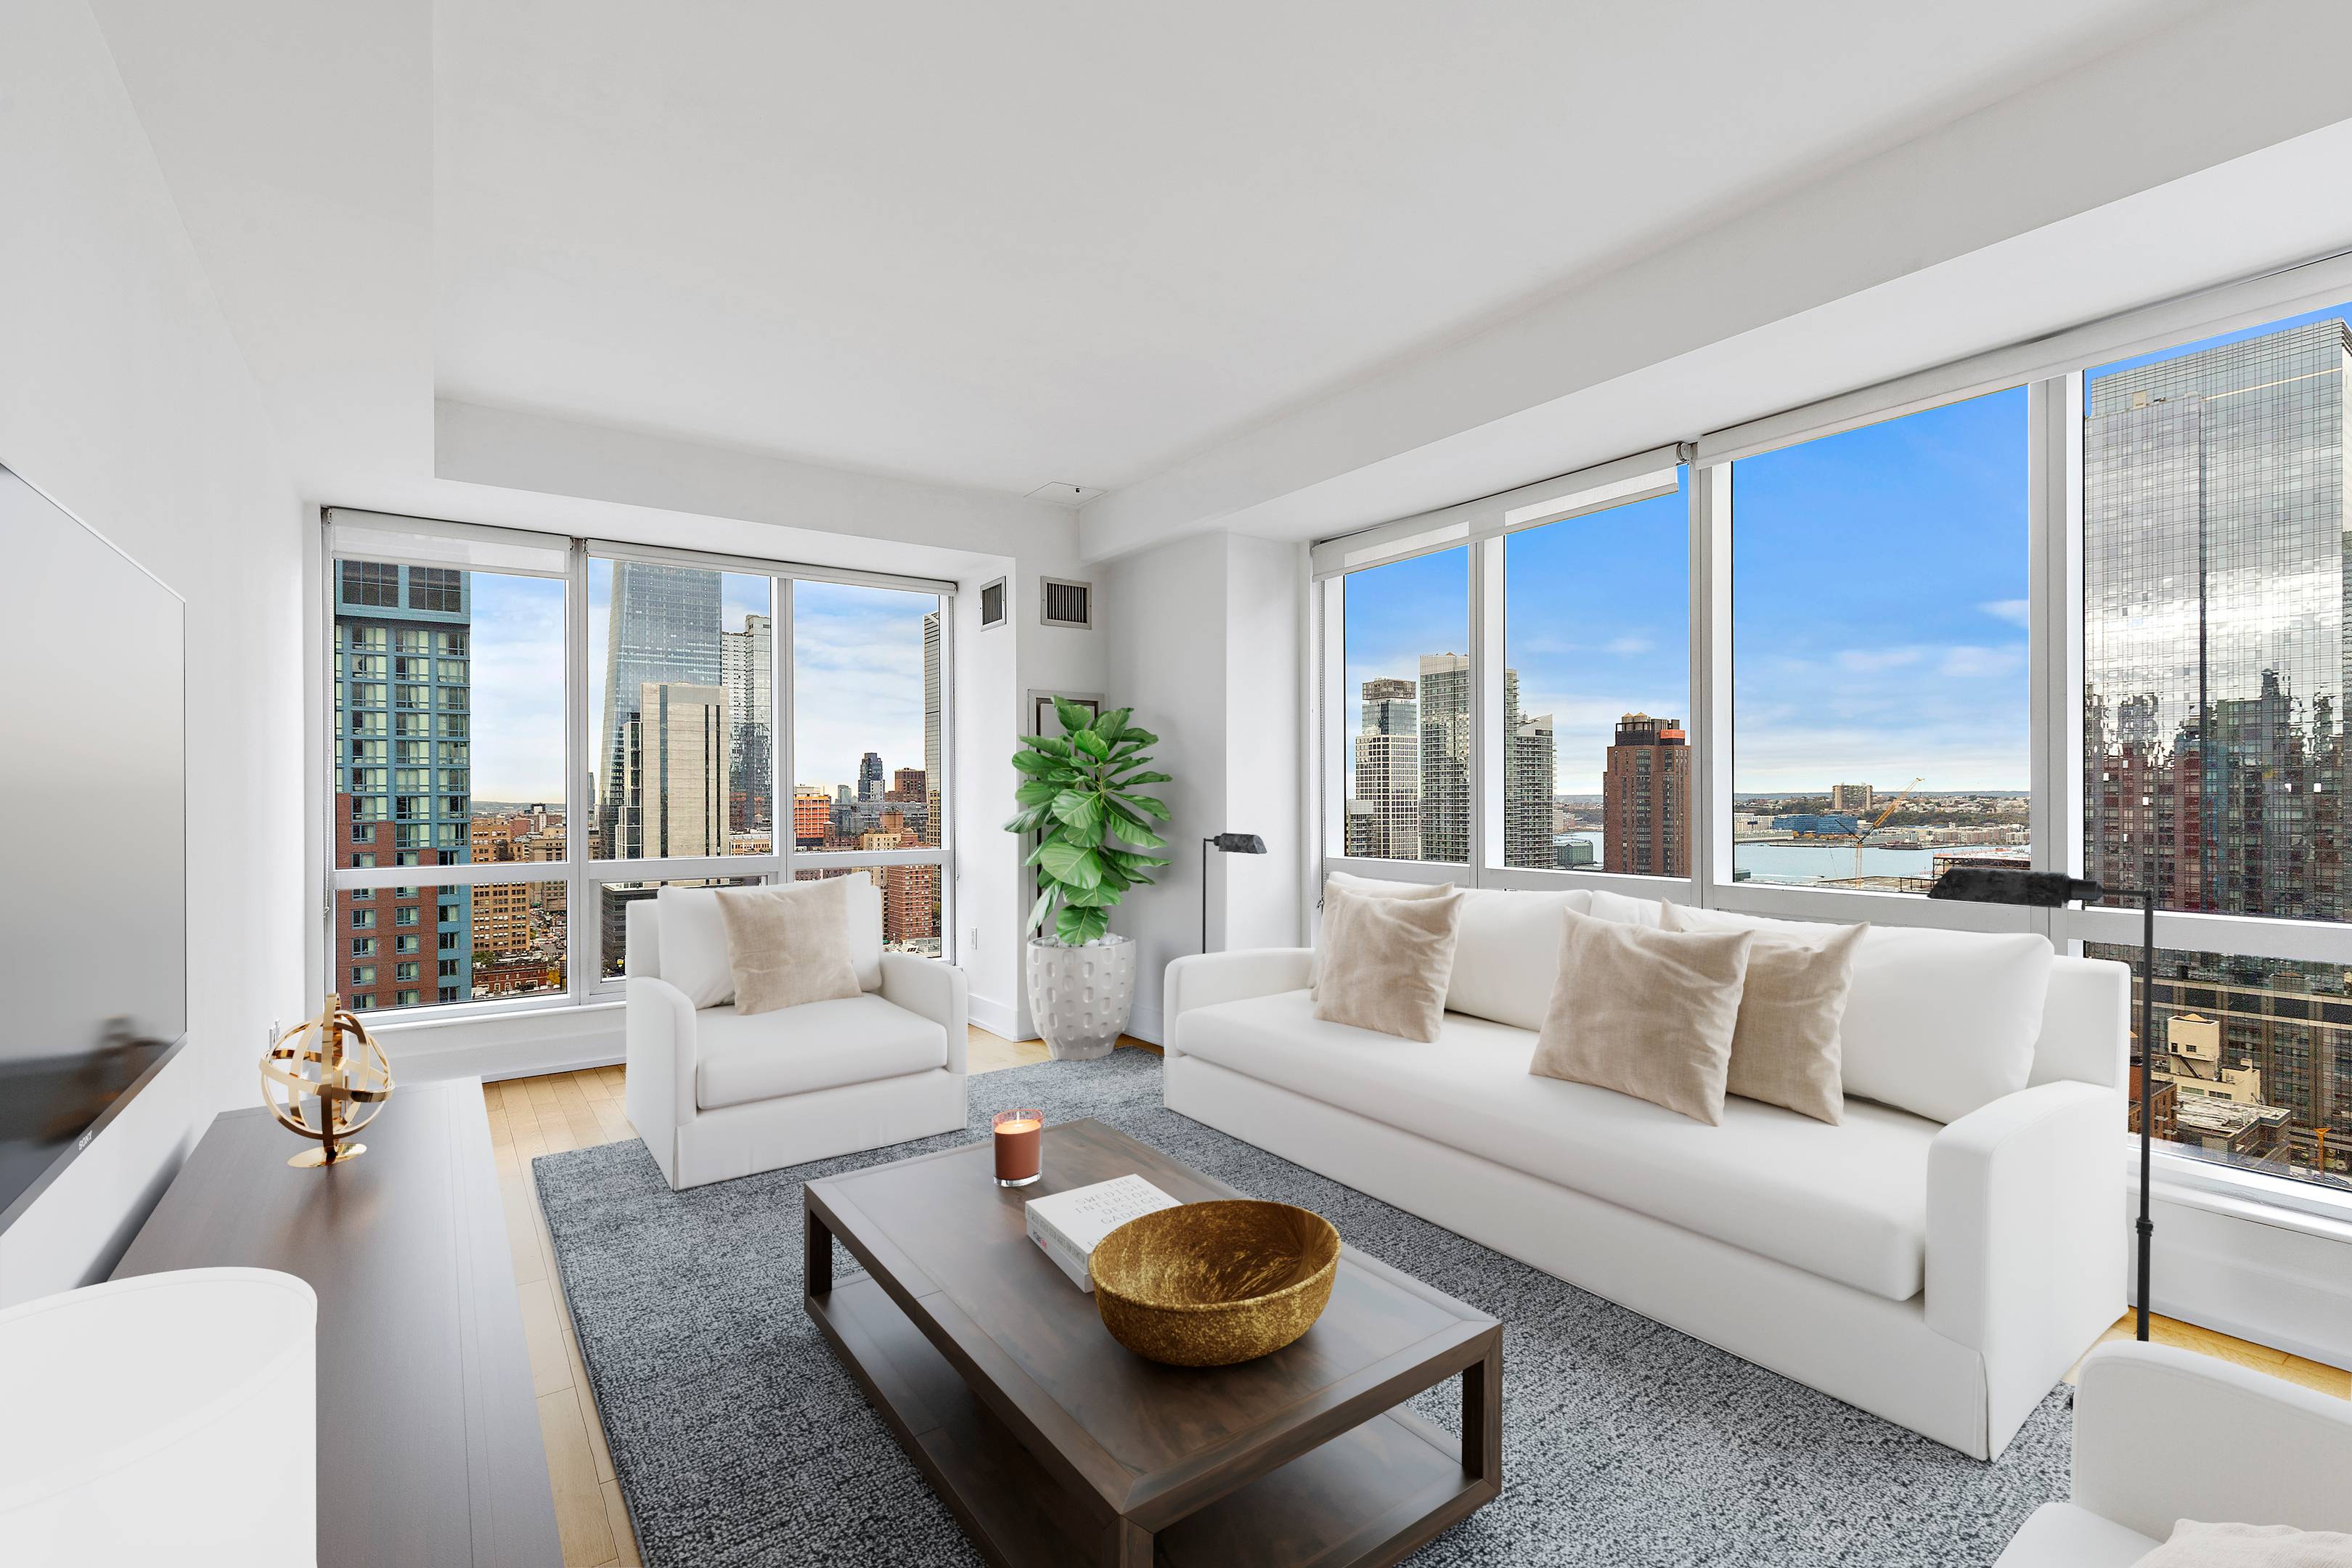 Pet Friendly Split 2Bed/2Bath Condo with River and Skyline Views of Hudson Yards